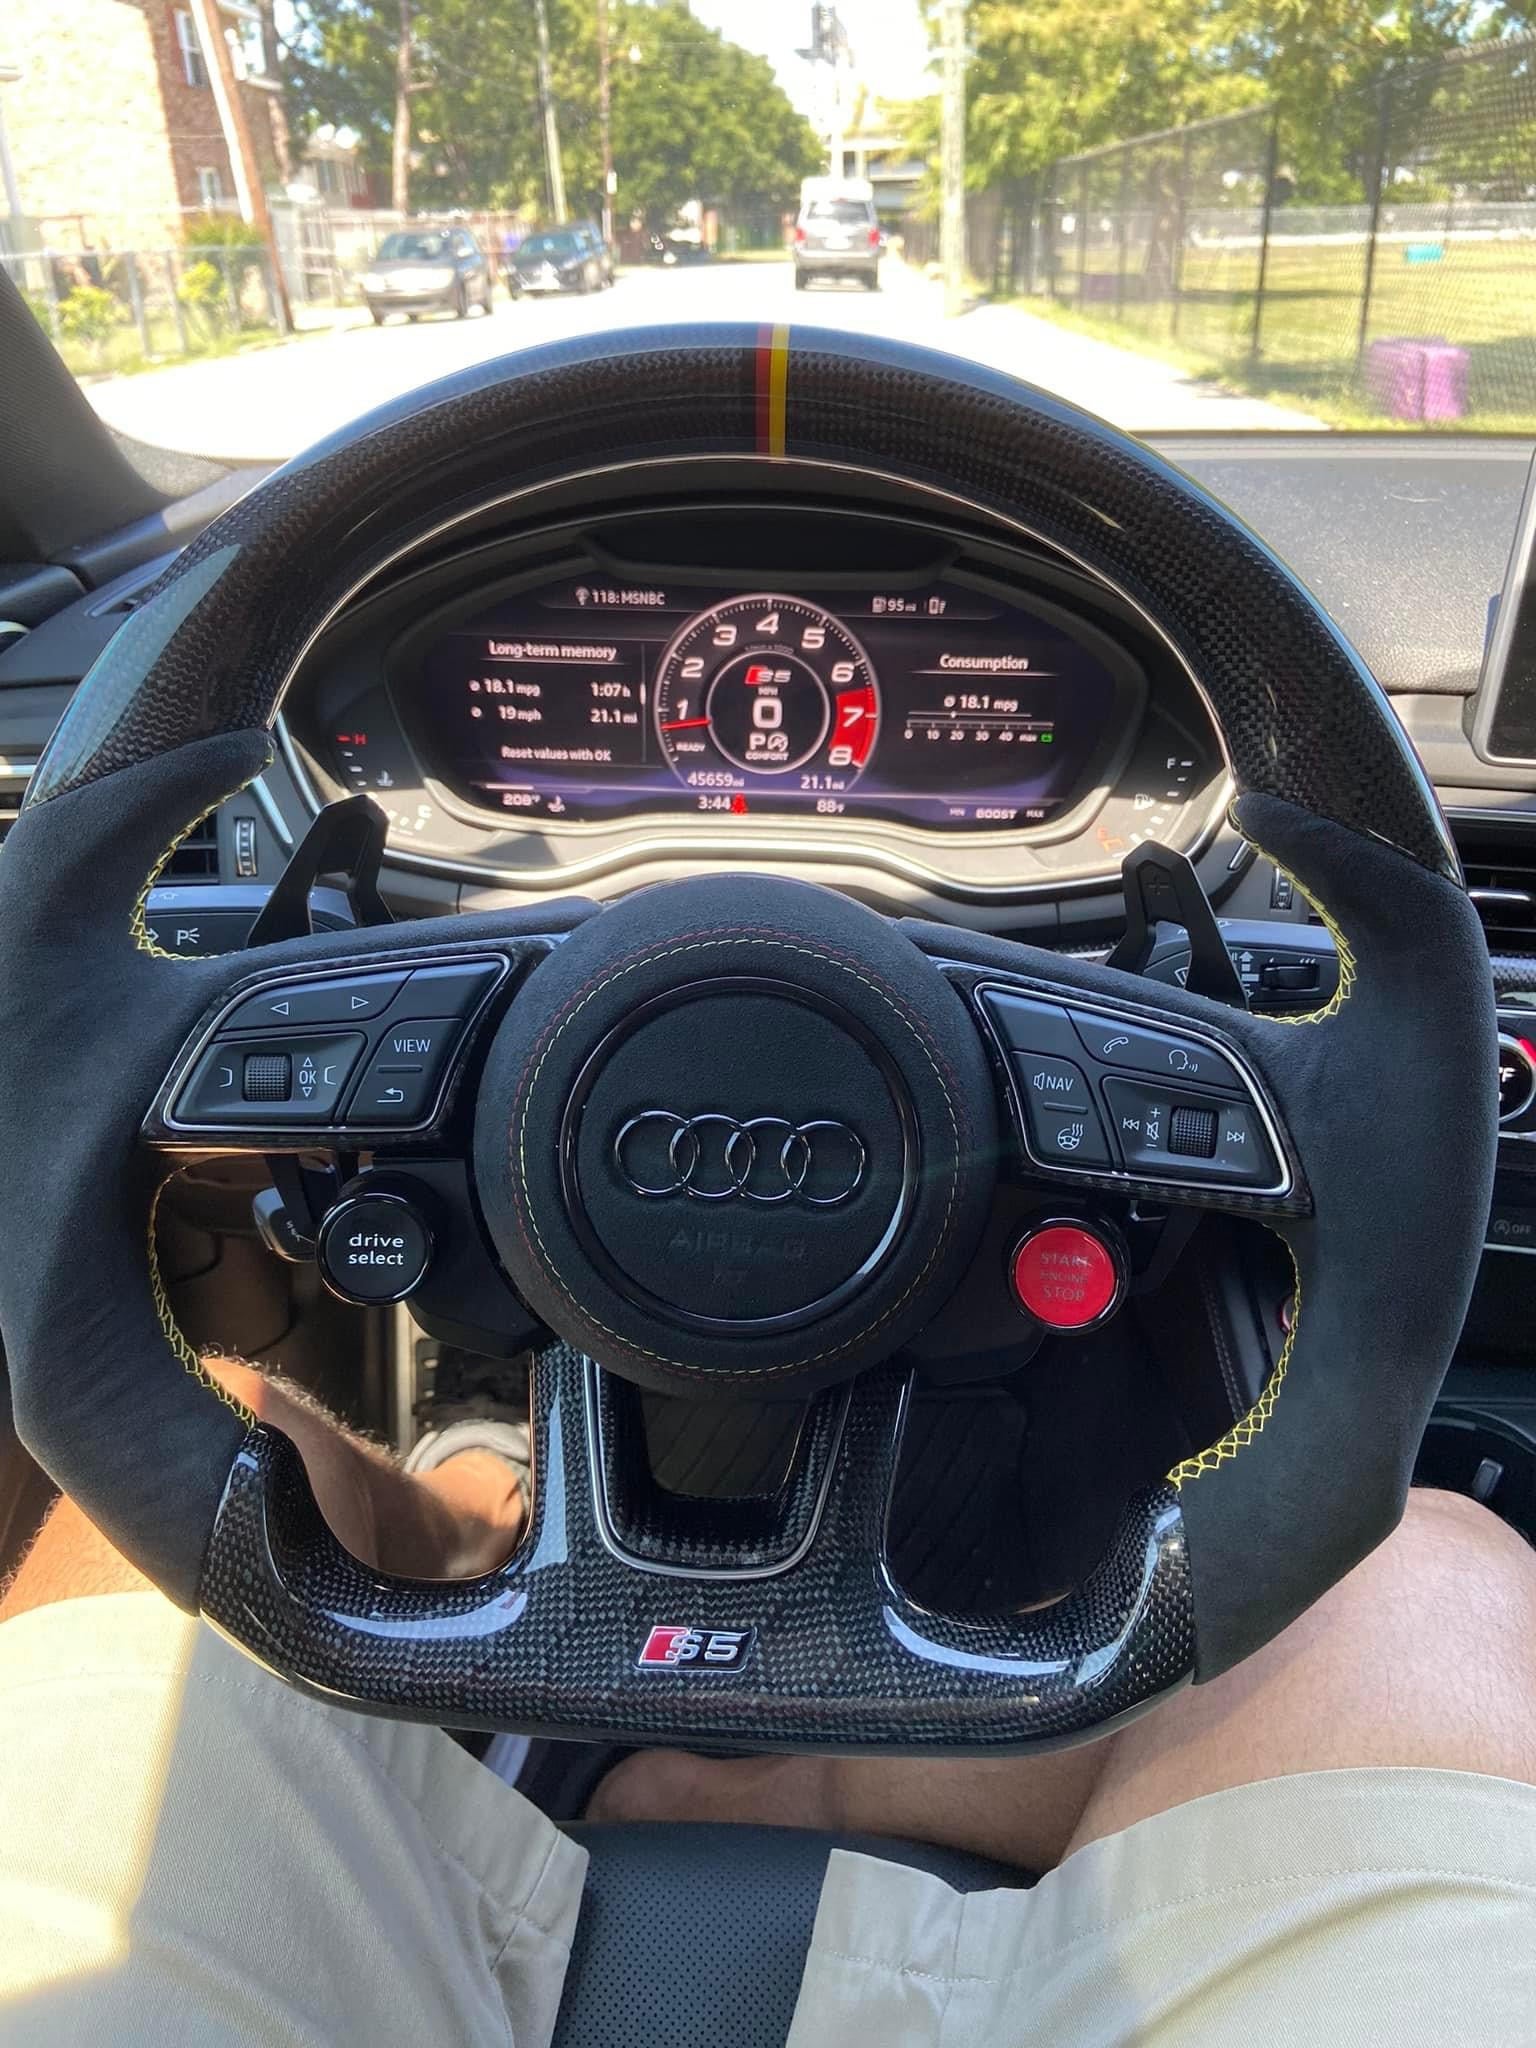 LED Steering Wheel Paddle Shifter for Audi TT TTRS R8 RS4 RS5 RS6